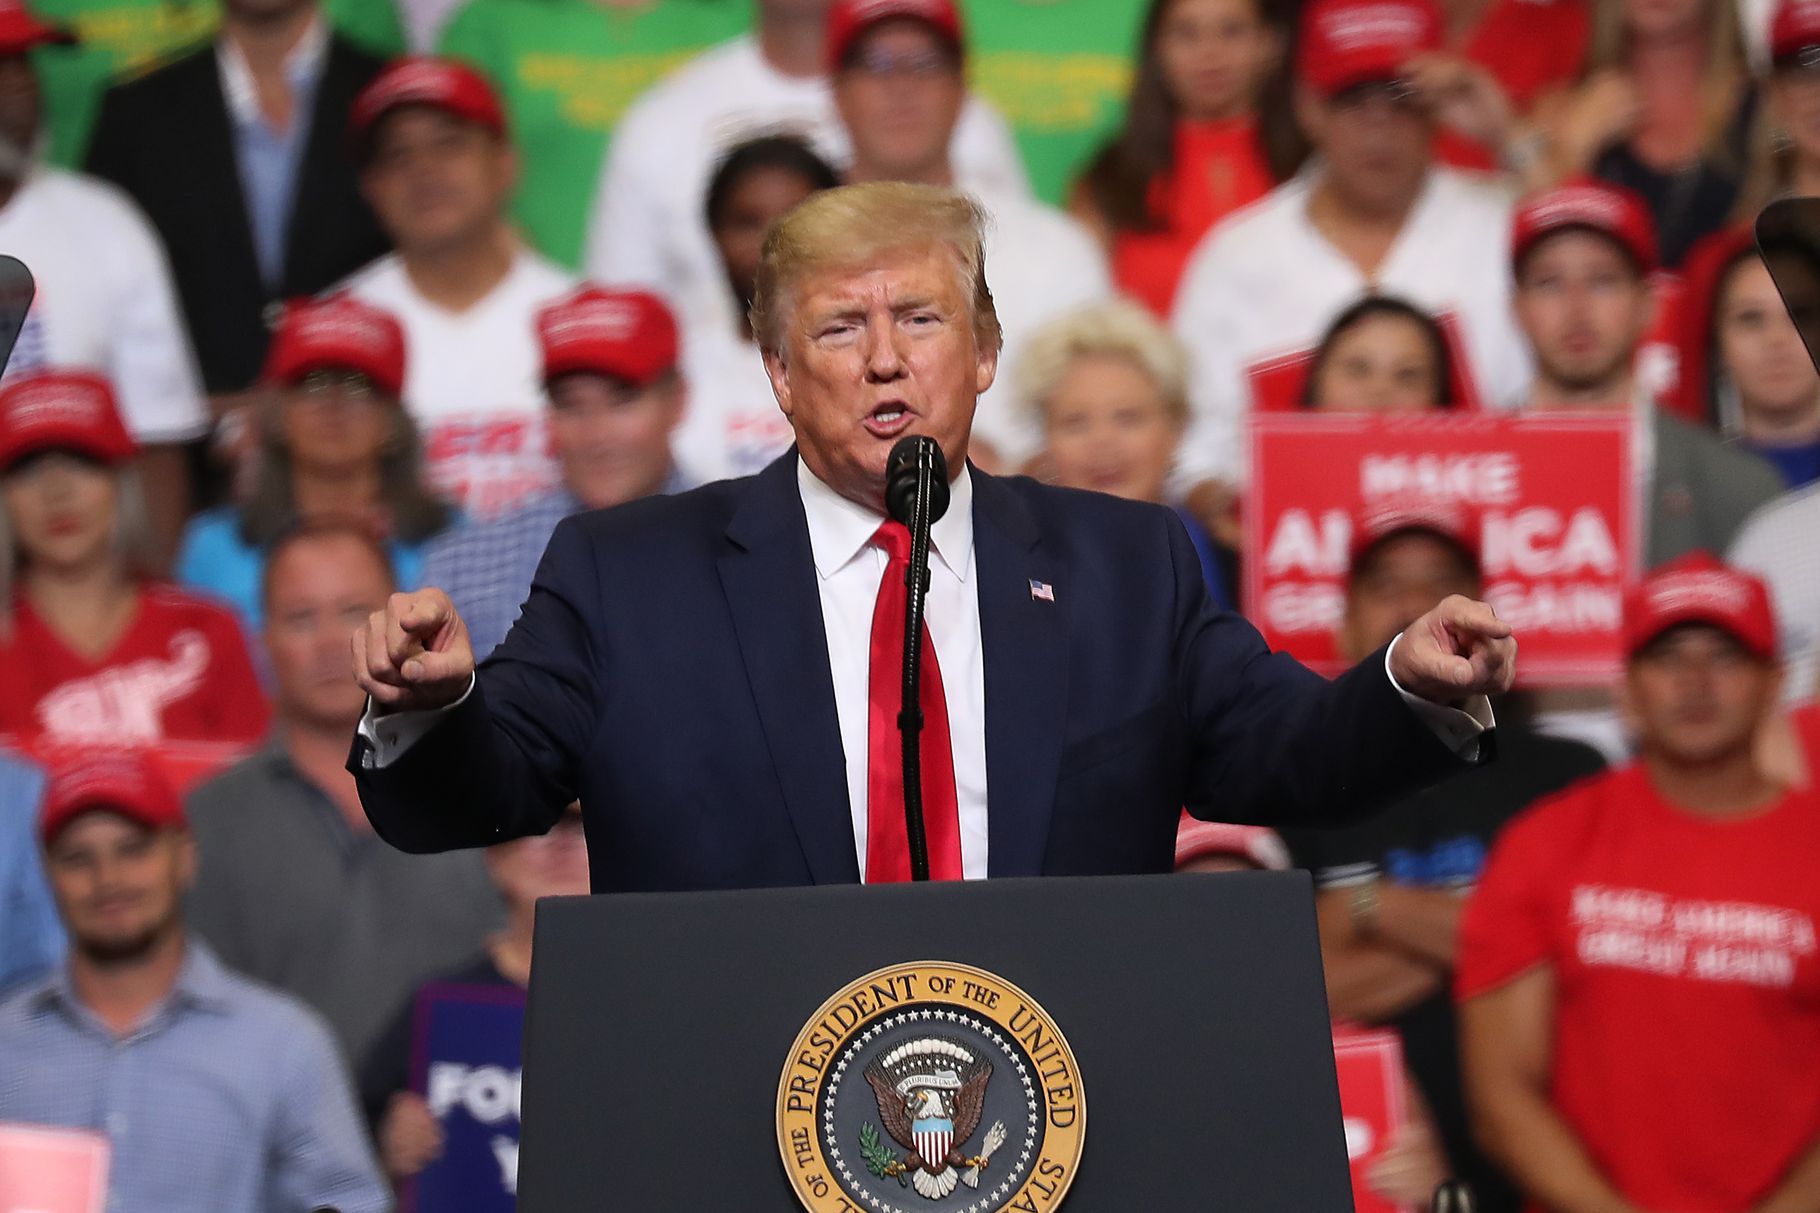 Trumps 2020 reelection rally: 2 winners and 4 losers in his speech